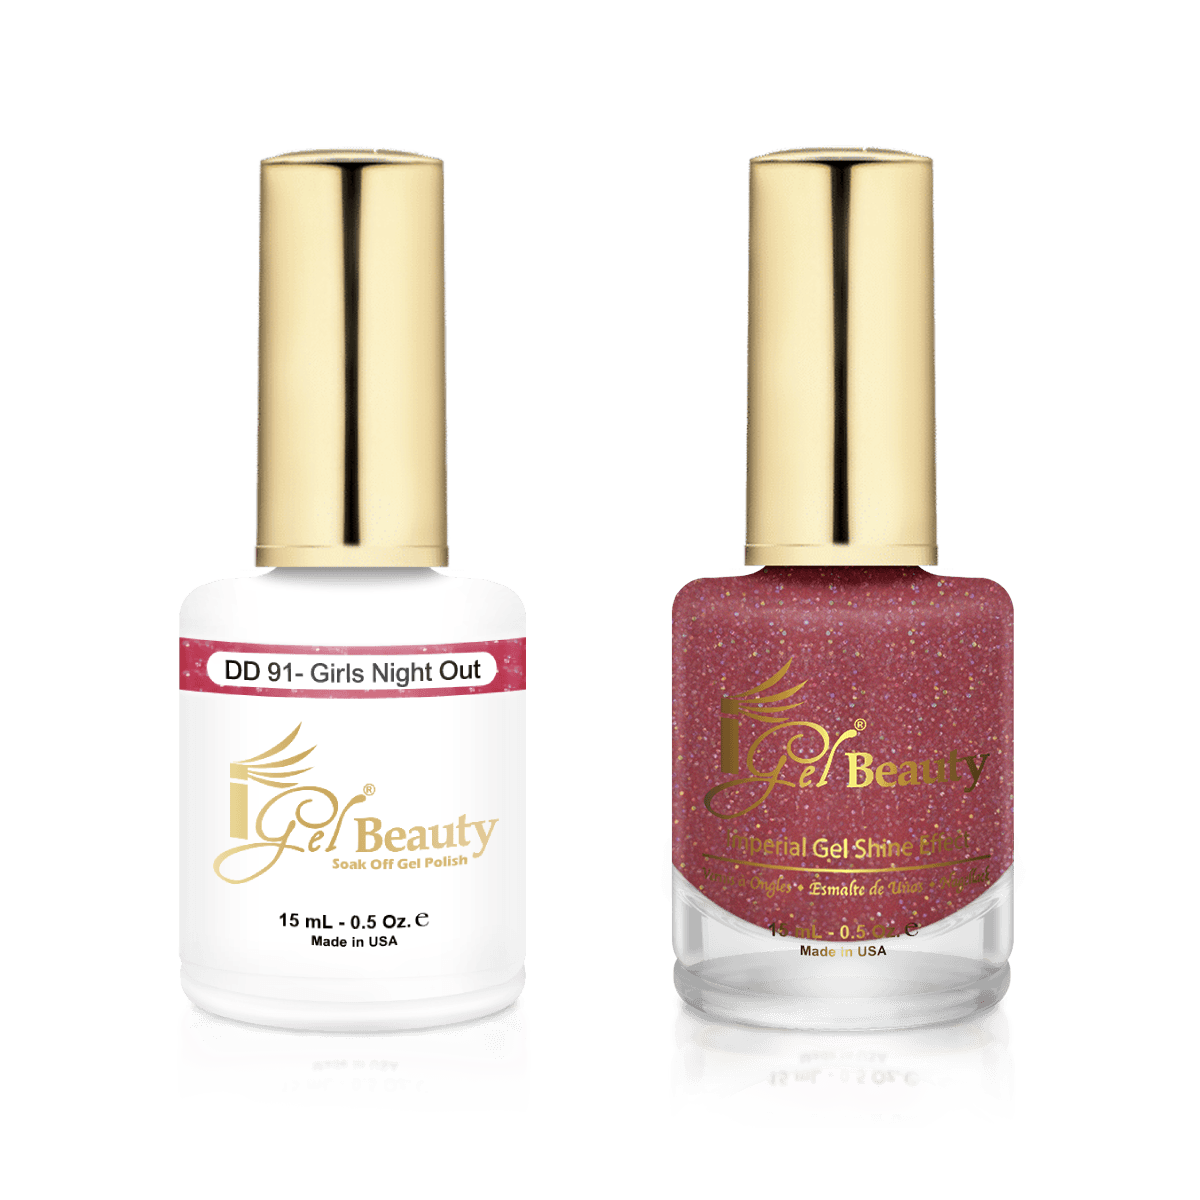 IGel Duo Gel Polish + Matching Nail Lacquer DD 91 GIRLS NIGHT OUT